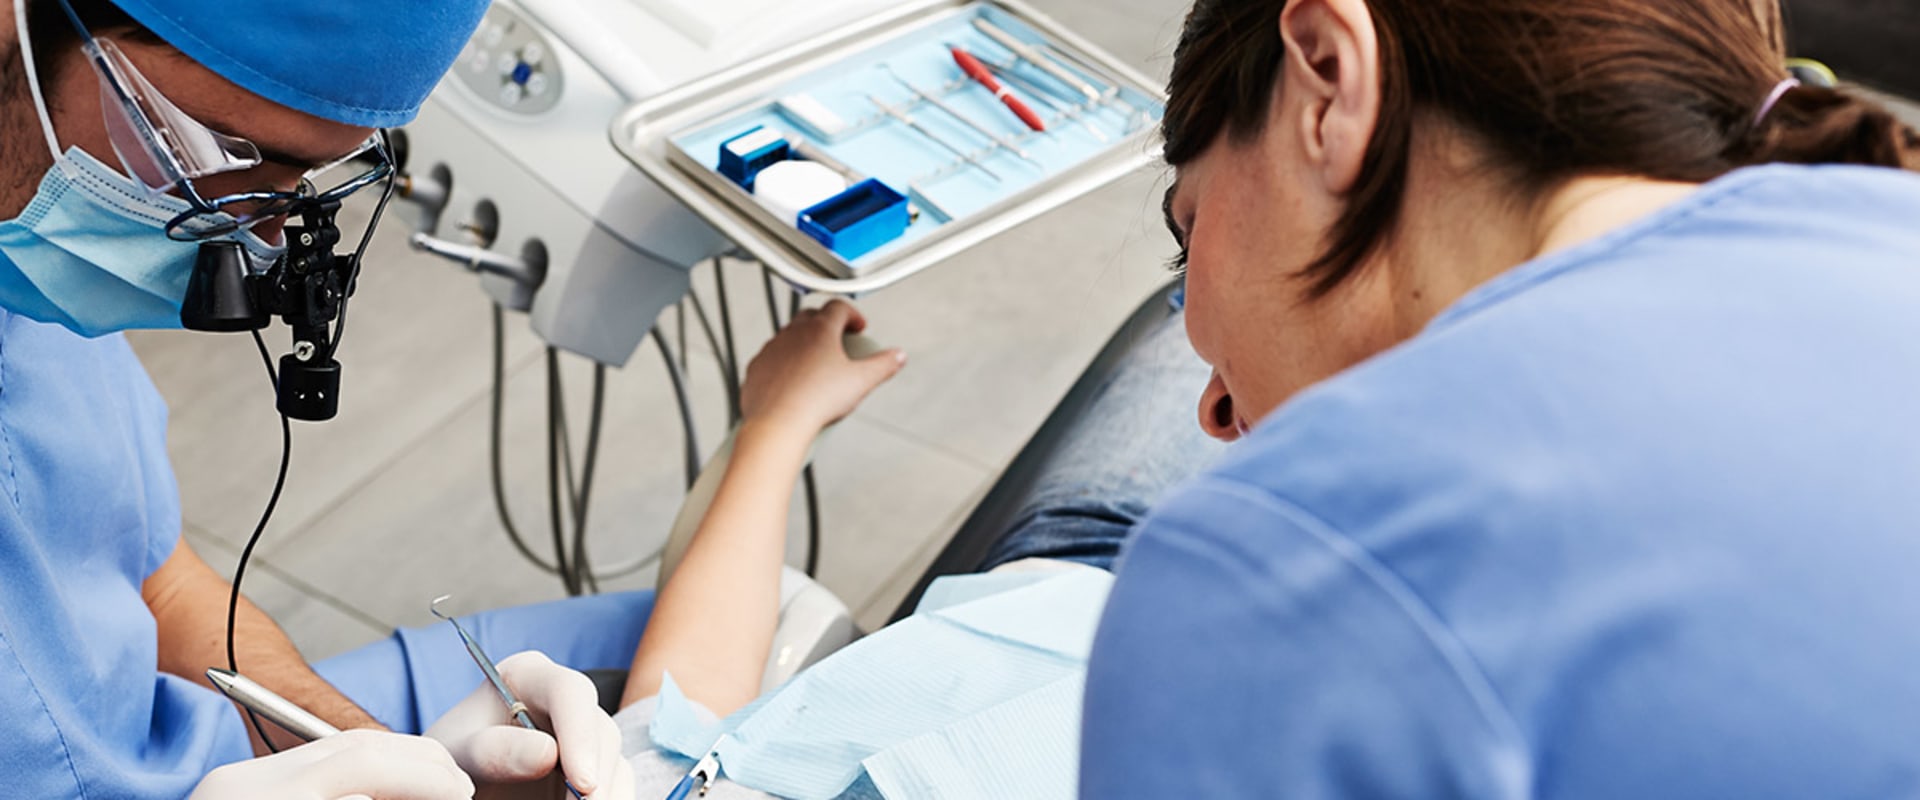 What is the Most Common Medical Emergency in Dentistry?